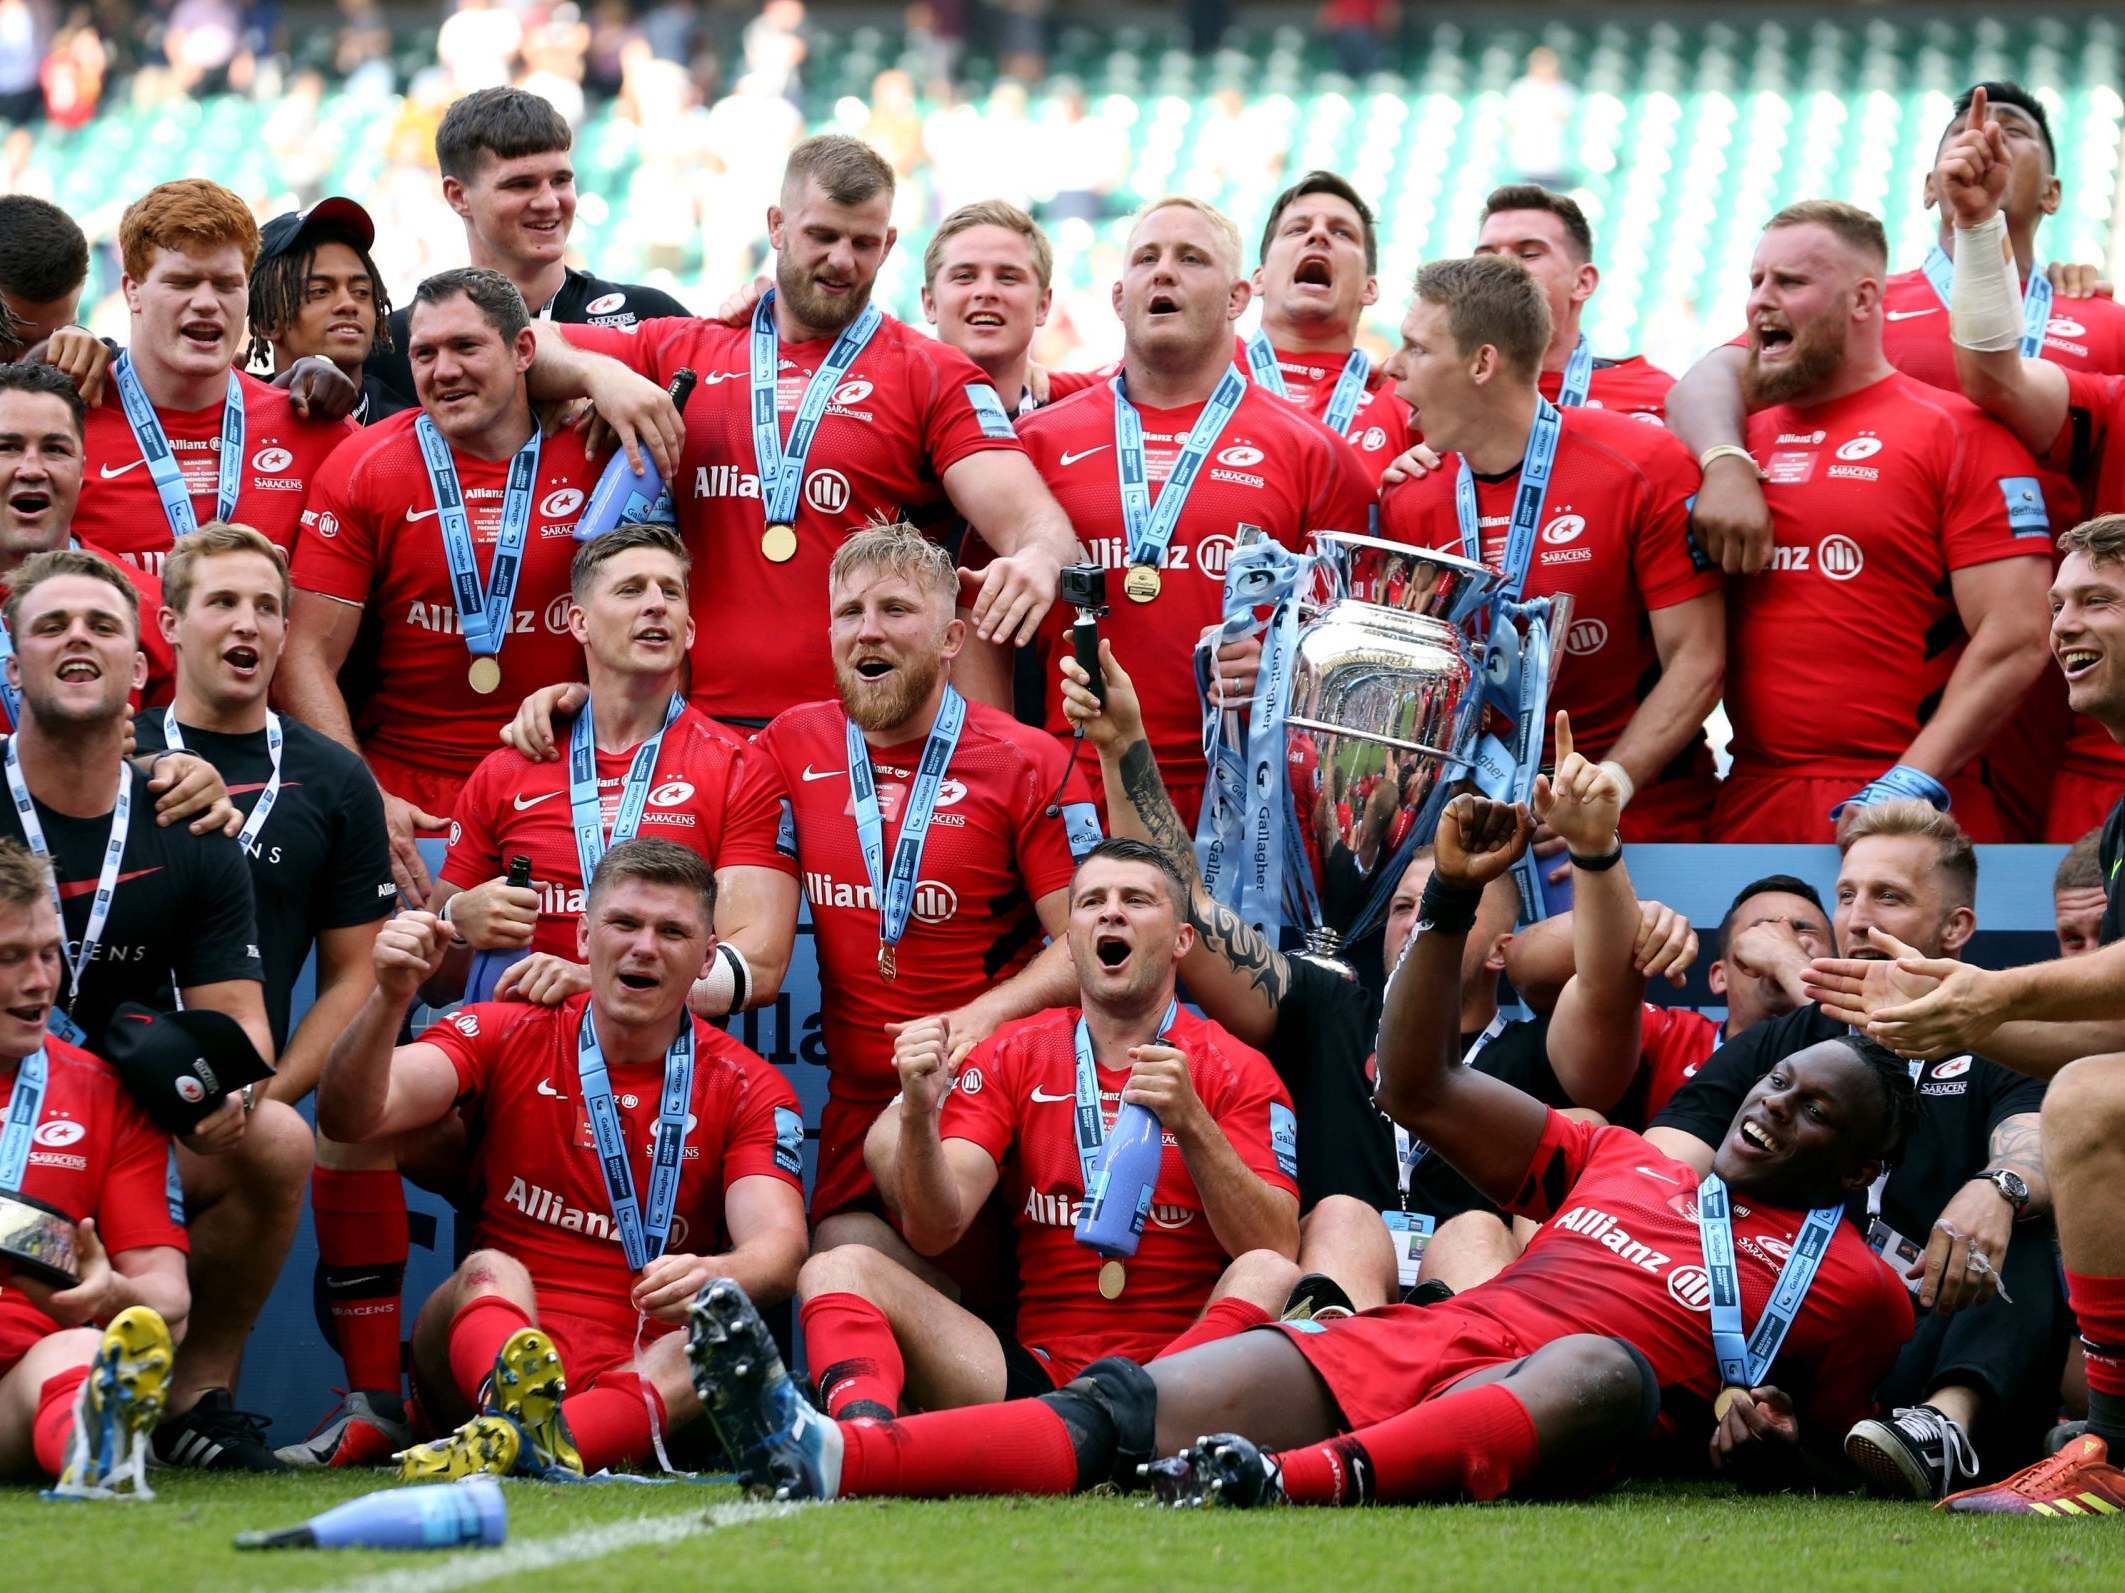 Saracens celebrate with the Premiership trophy